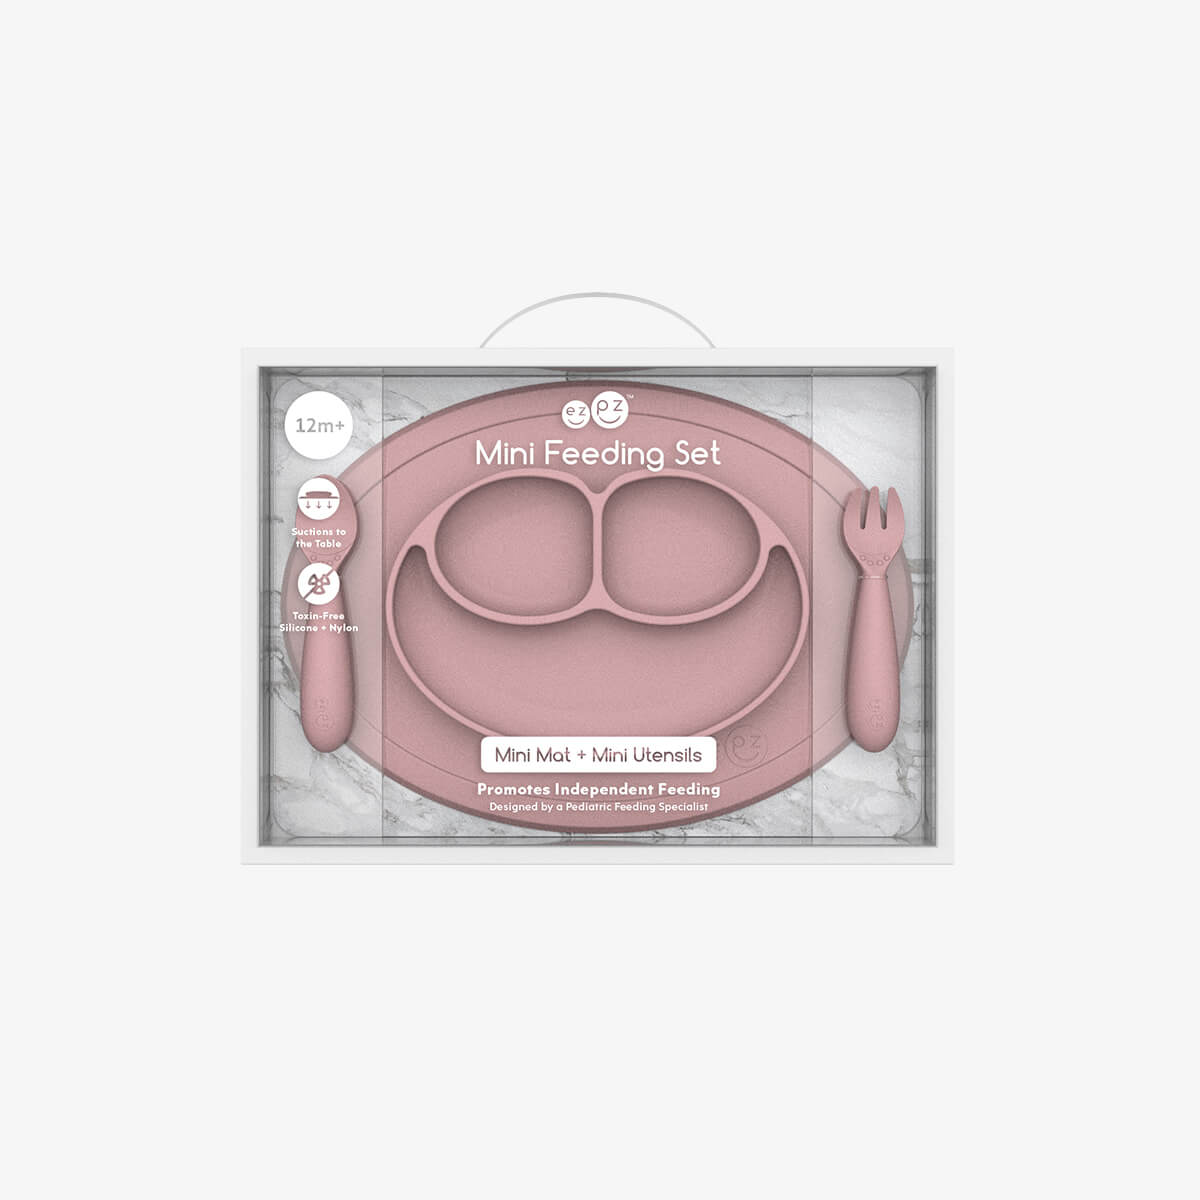 Mini Feeding Set in Blush by ezpz / Silicone Plate, Fork & Spoon for Toddlers